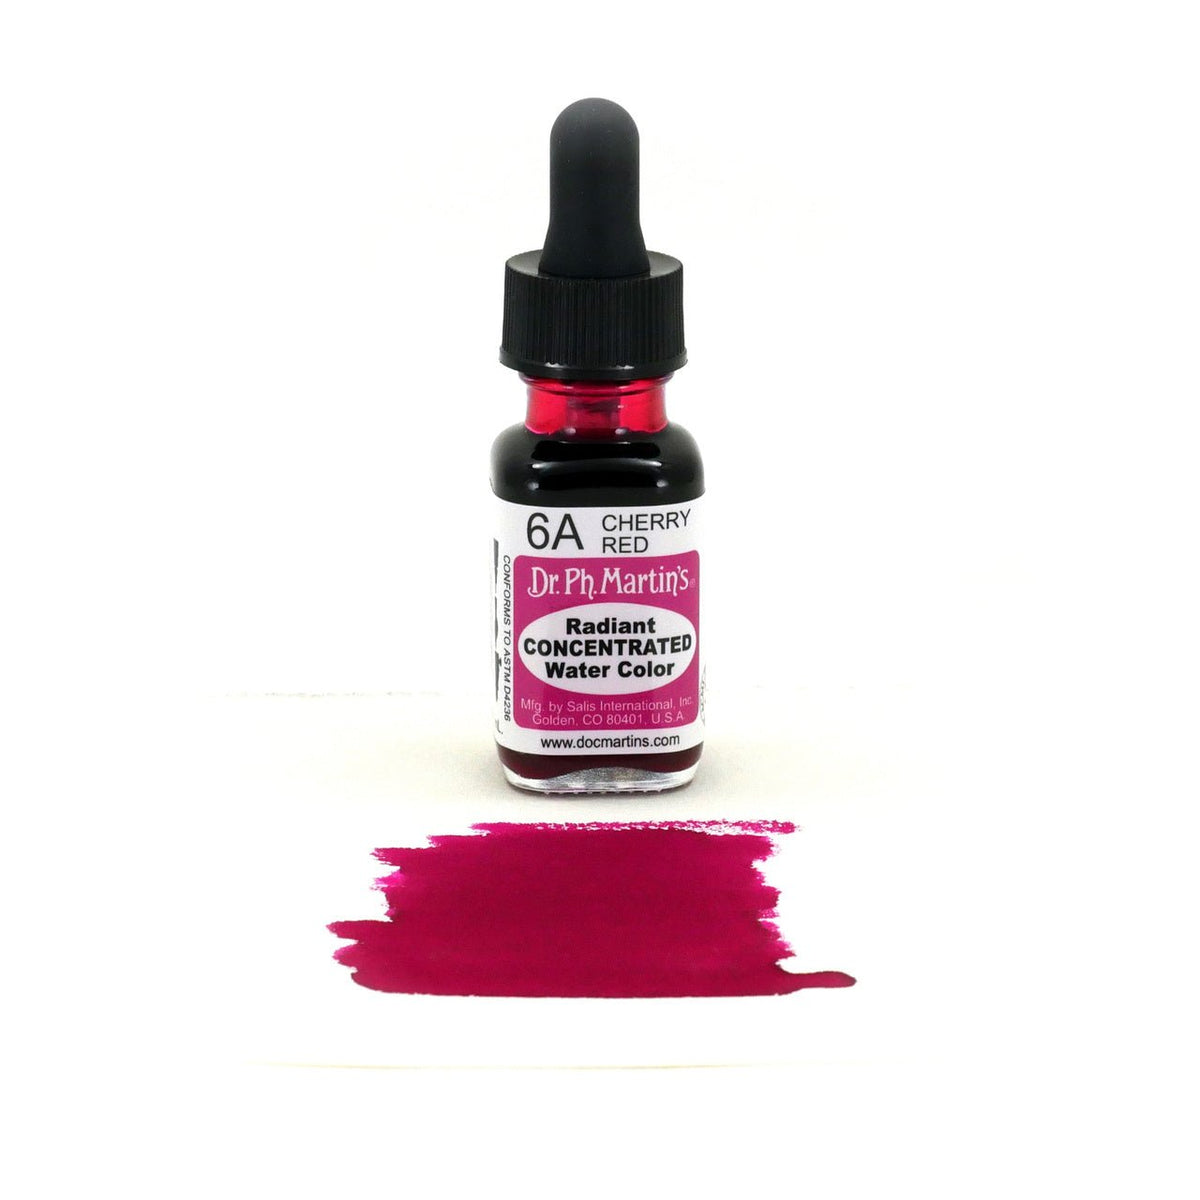 Dr. Ph. Martin's Radiant Watercolor .5 oz - Cherry Red - merriartist.com